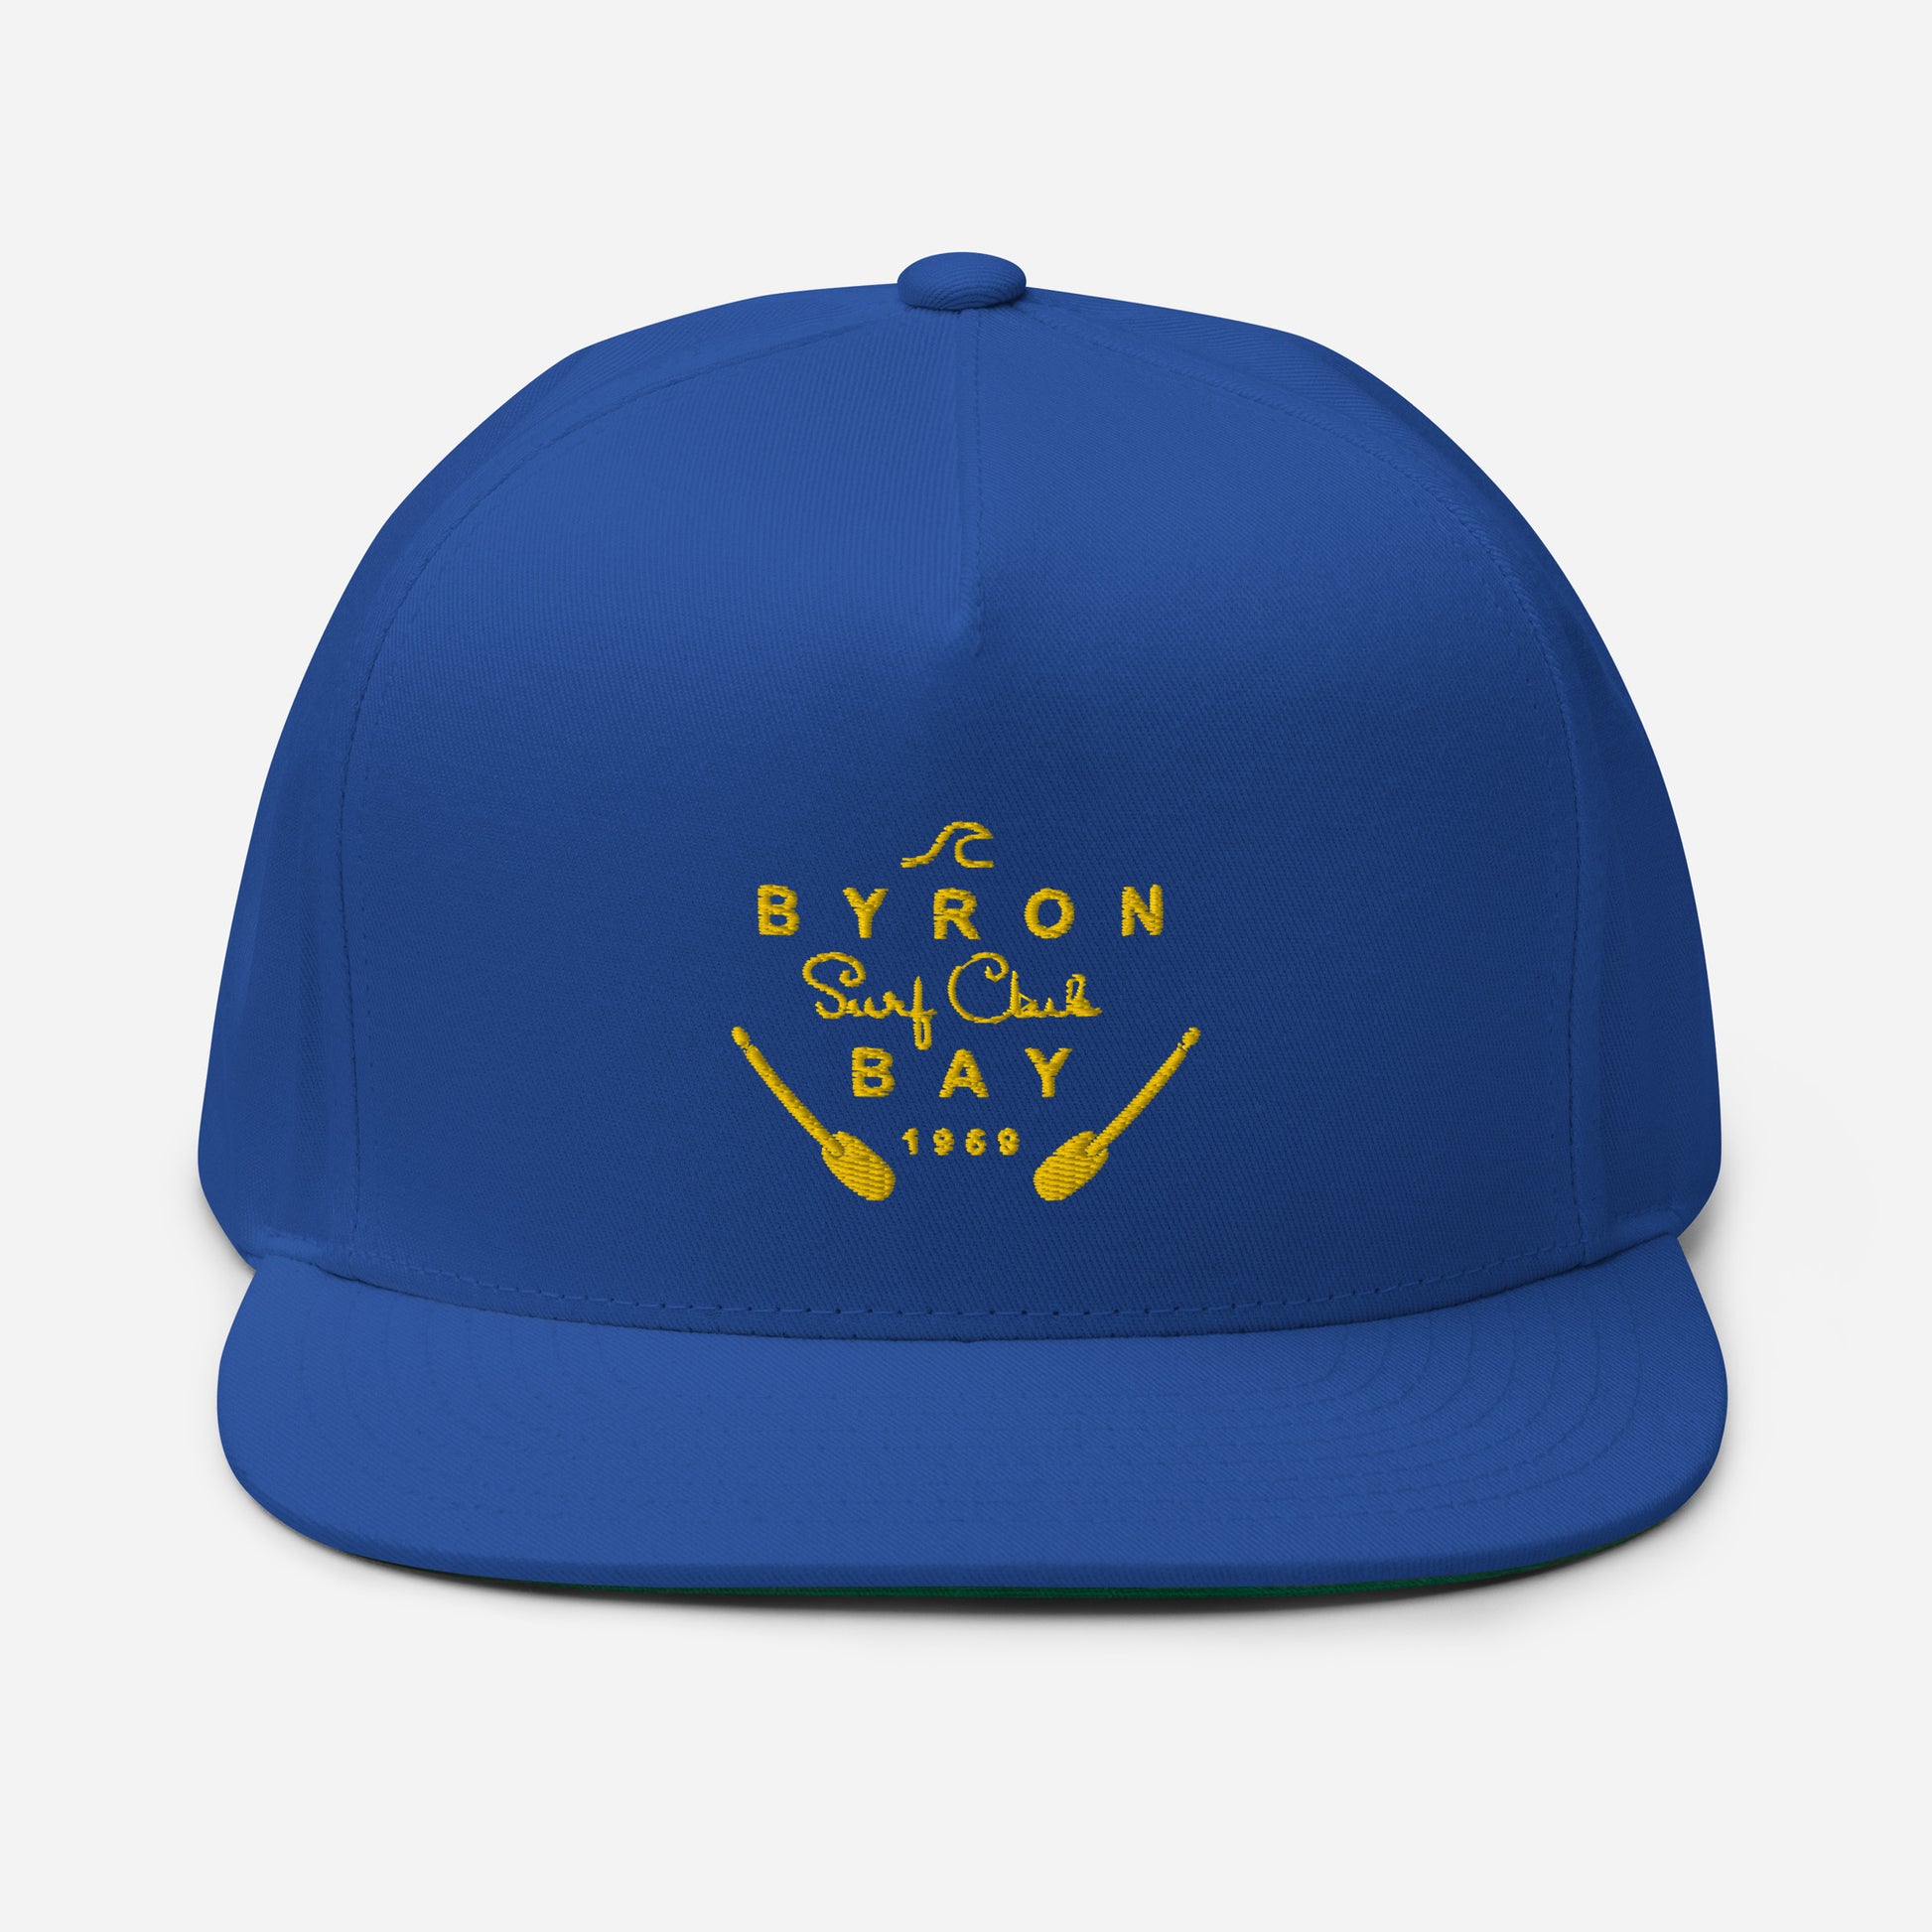  Flat Bill Cap - Royal Blue - Front view - With Yellow Byron Bay Surf Club logo on front - Genuine Byron Bay Merchandise | Produced by Go Sea Kayak Byron Bay 